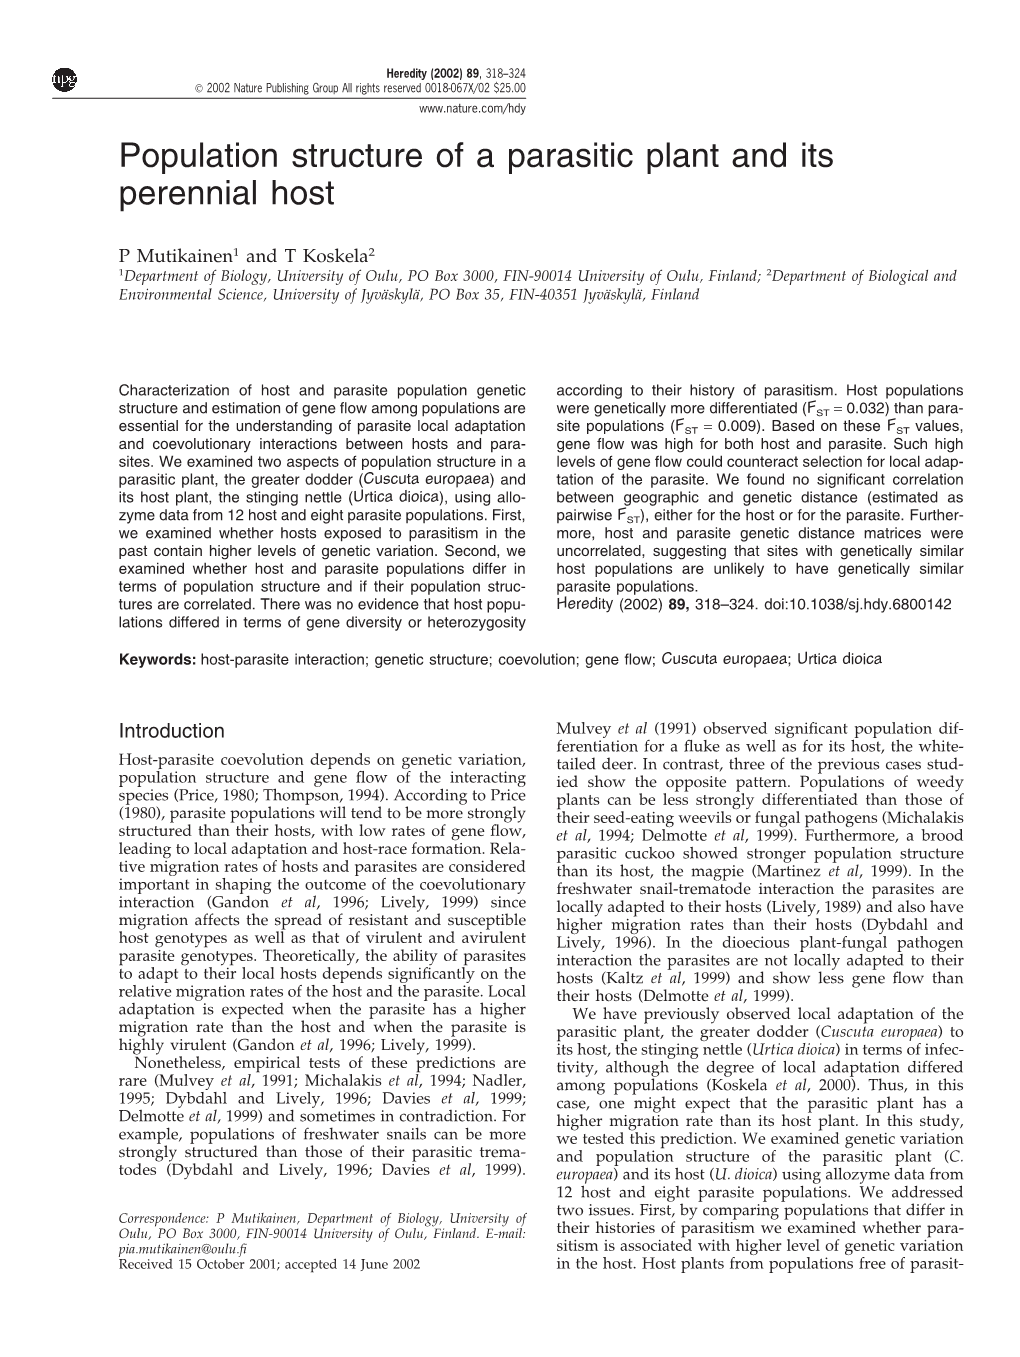 Population Structure of a Parasitic Plant and Its Perennial Host